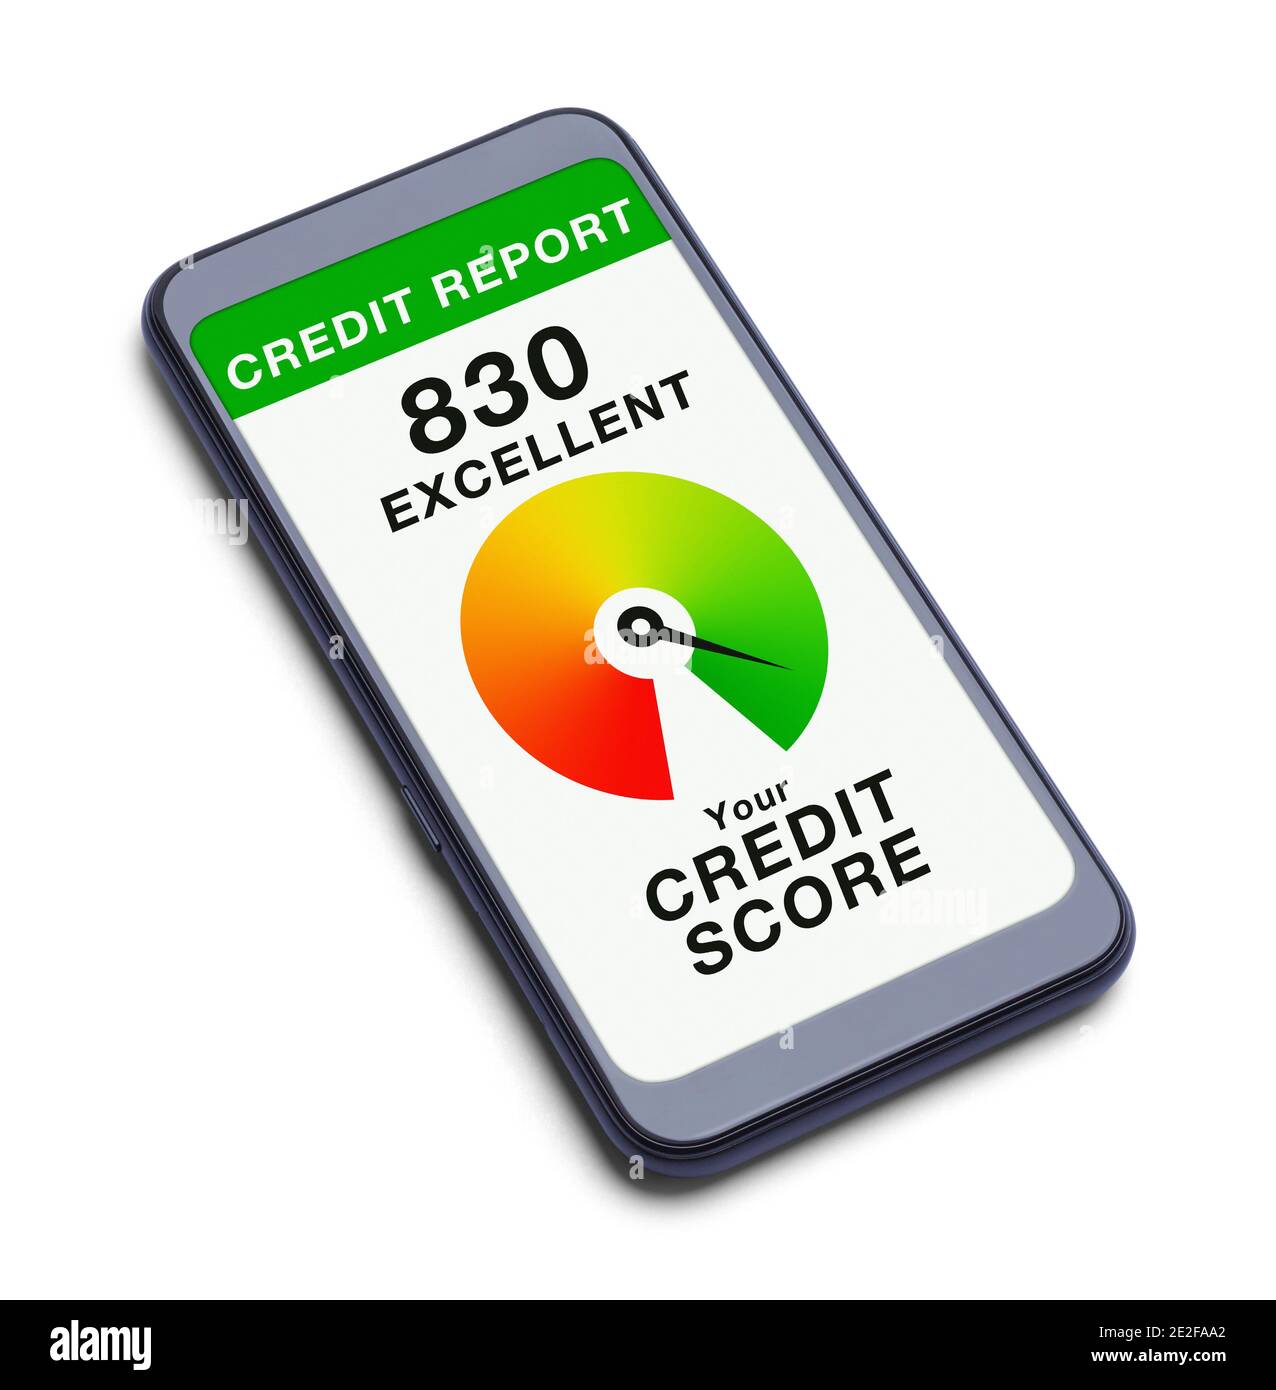 Smart Phone with Excellent Credit Score Rating Cut Out on White. Stock Photo